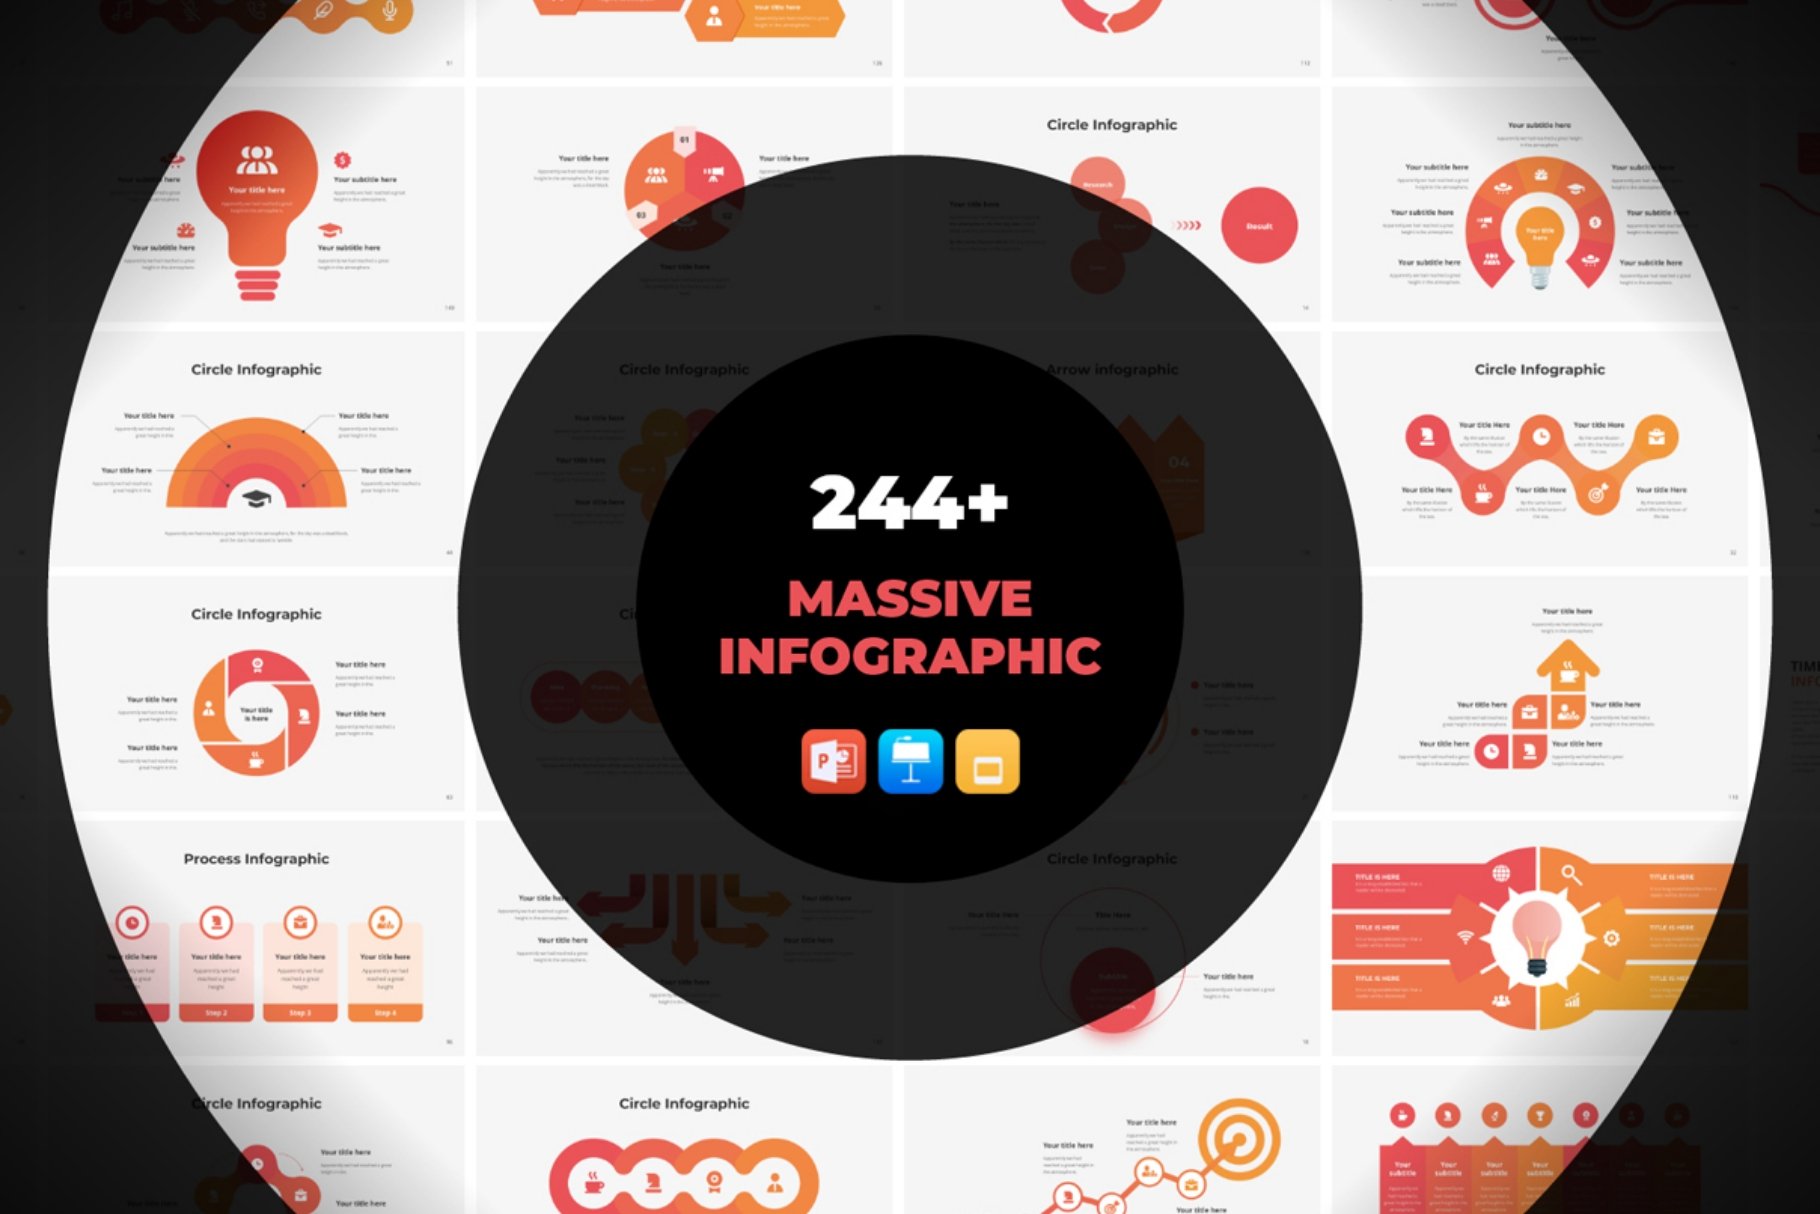 Infographic slide from Massive Infographic Template.